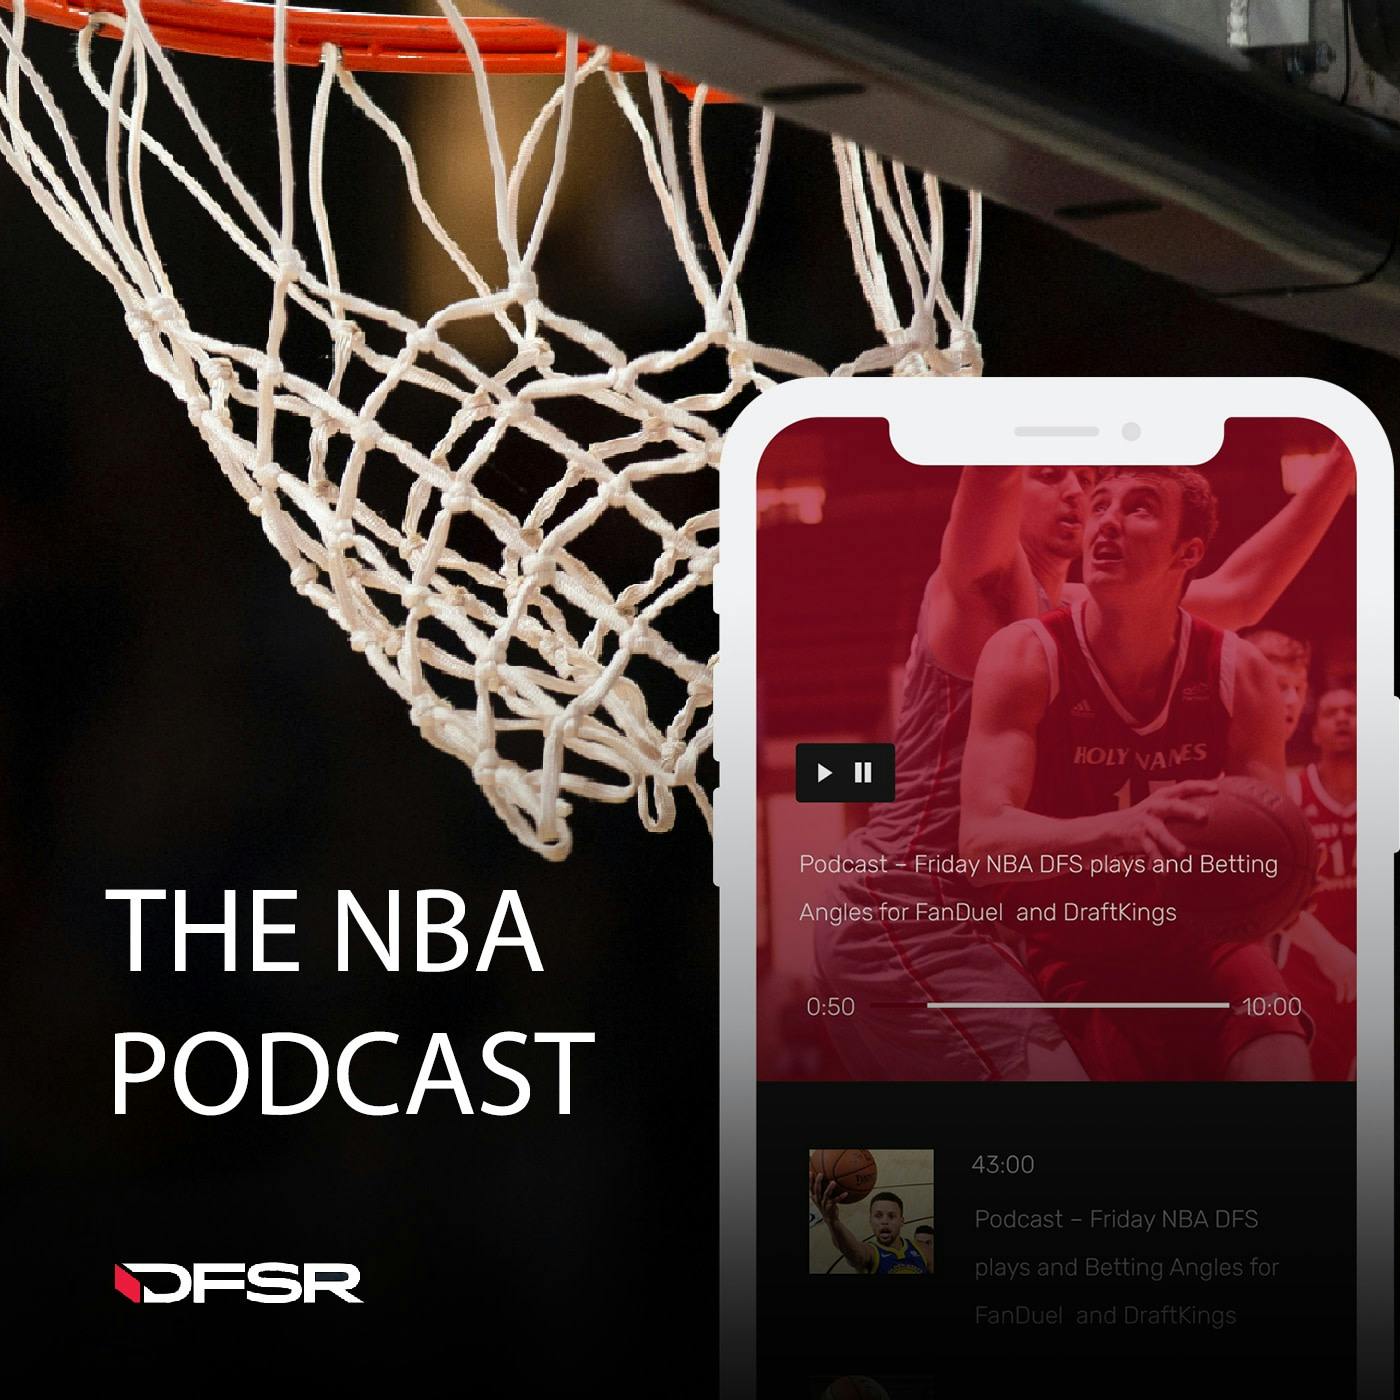 DFS NBA Podcast for FanDuel and DraftKings - Friday 11/16/18